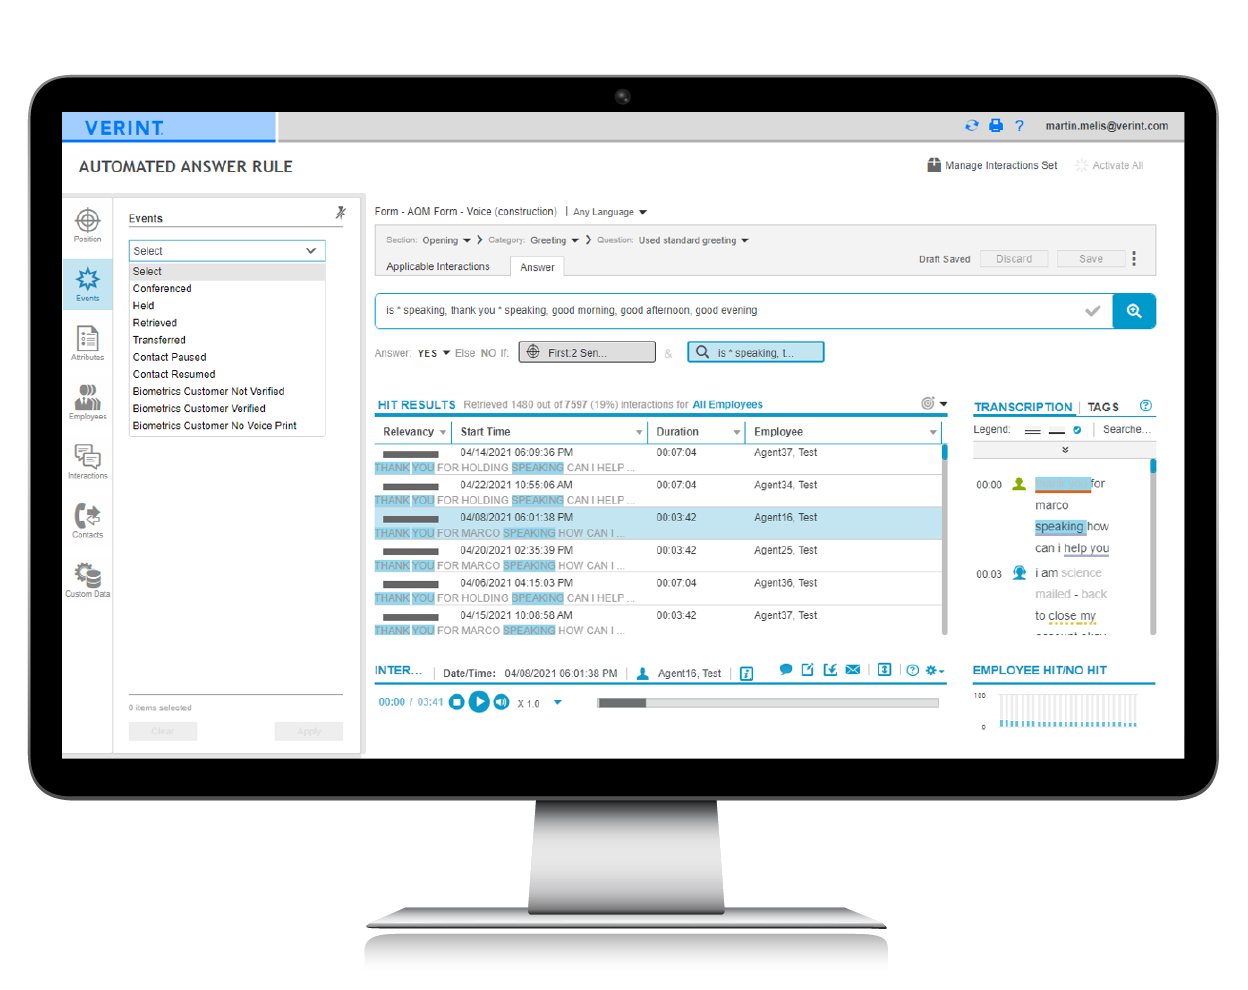 Verint Automated Quality Management Software - 5